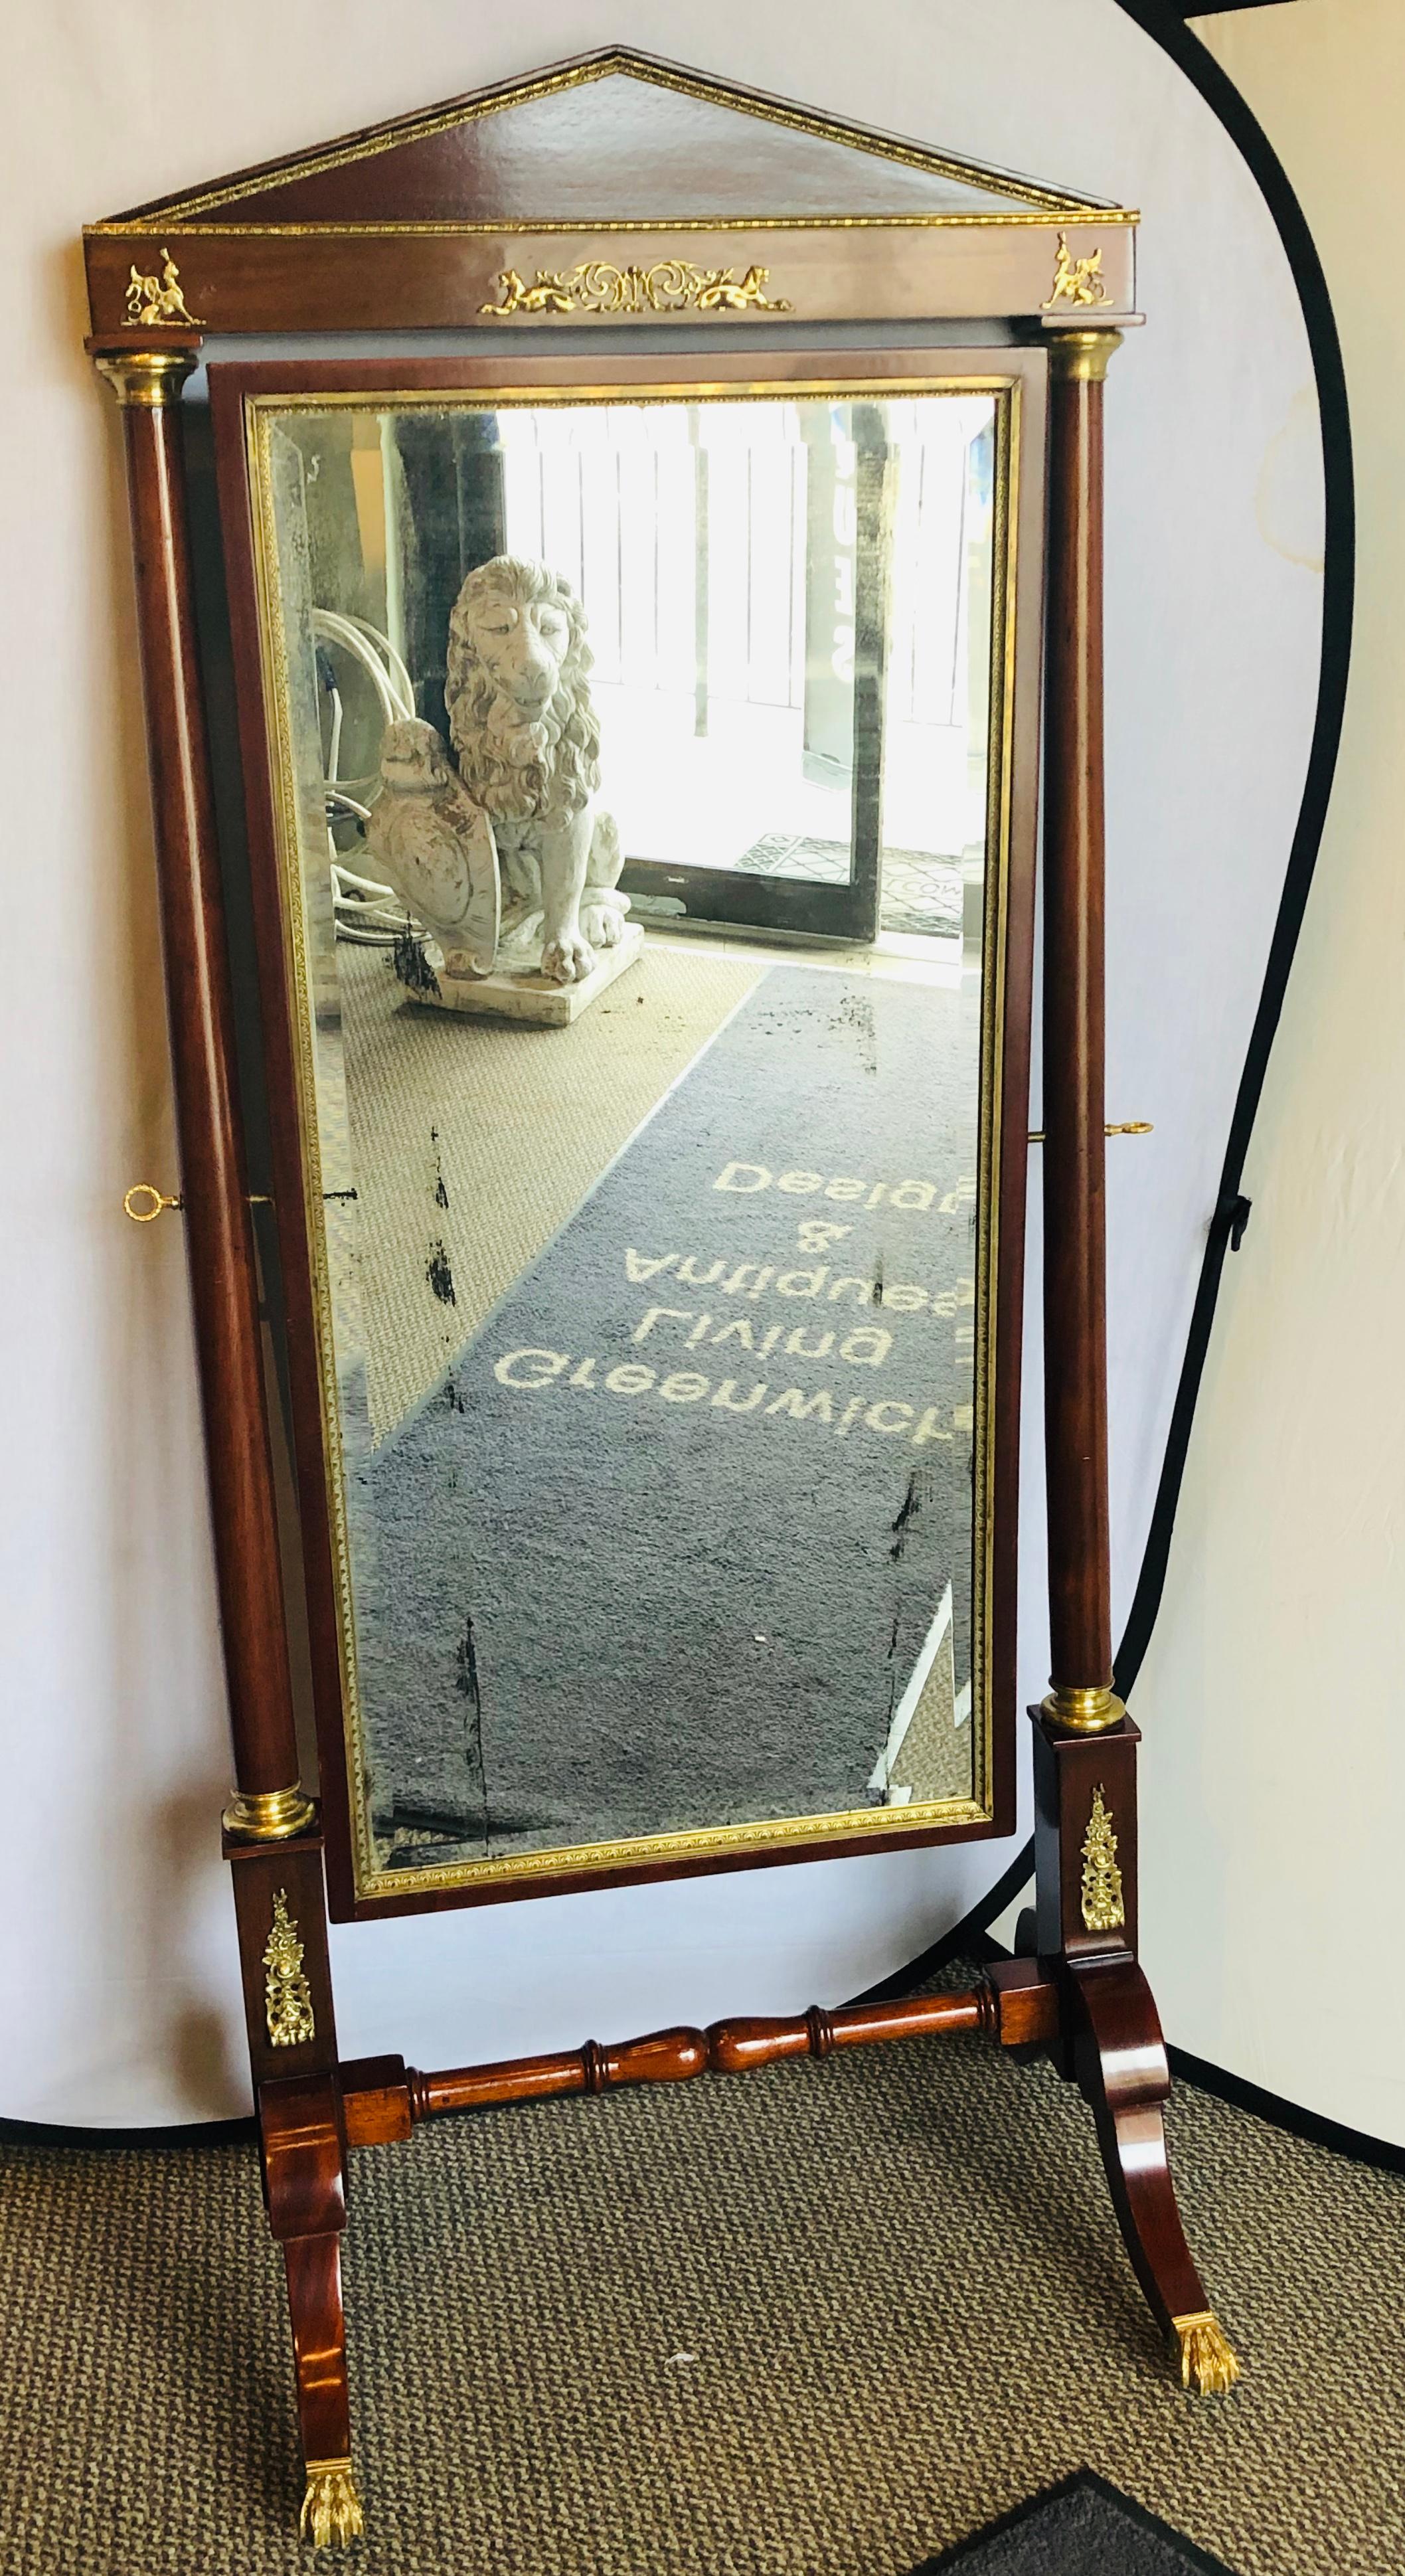 An Empire cheval floor full length mirror with bronze mounts, circa 19th-20th century. This sleek and stylish floor or full length cheval mirror can sit in most any Hollywood Regency, Deco or Formal Antique setting. The full bronze claw feet on